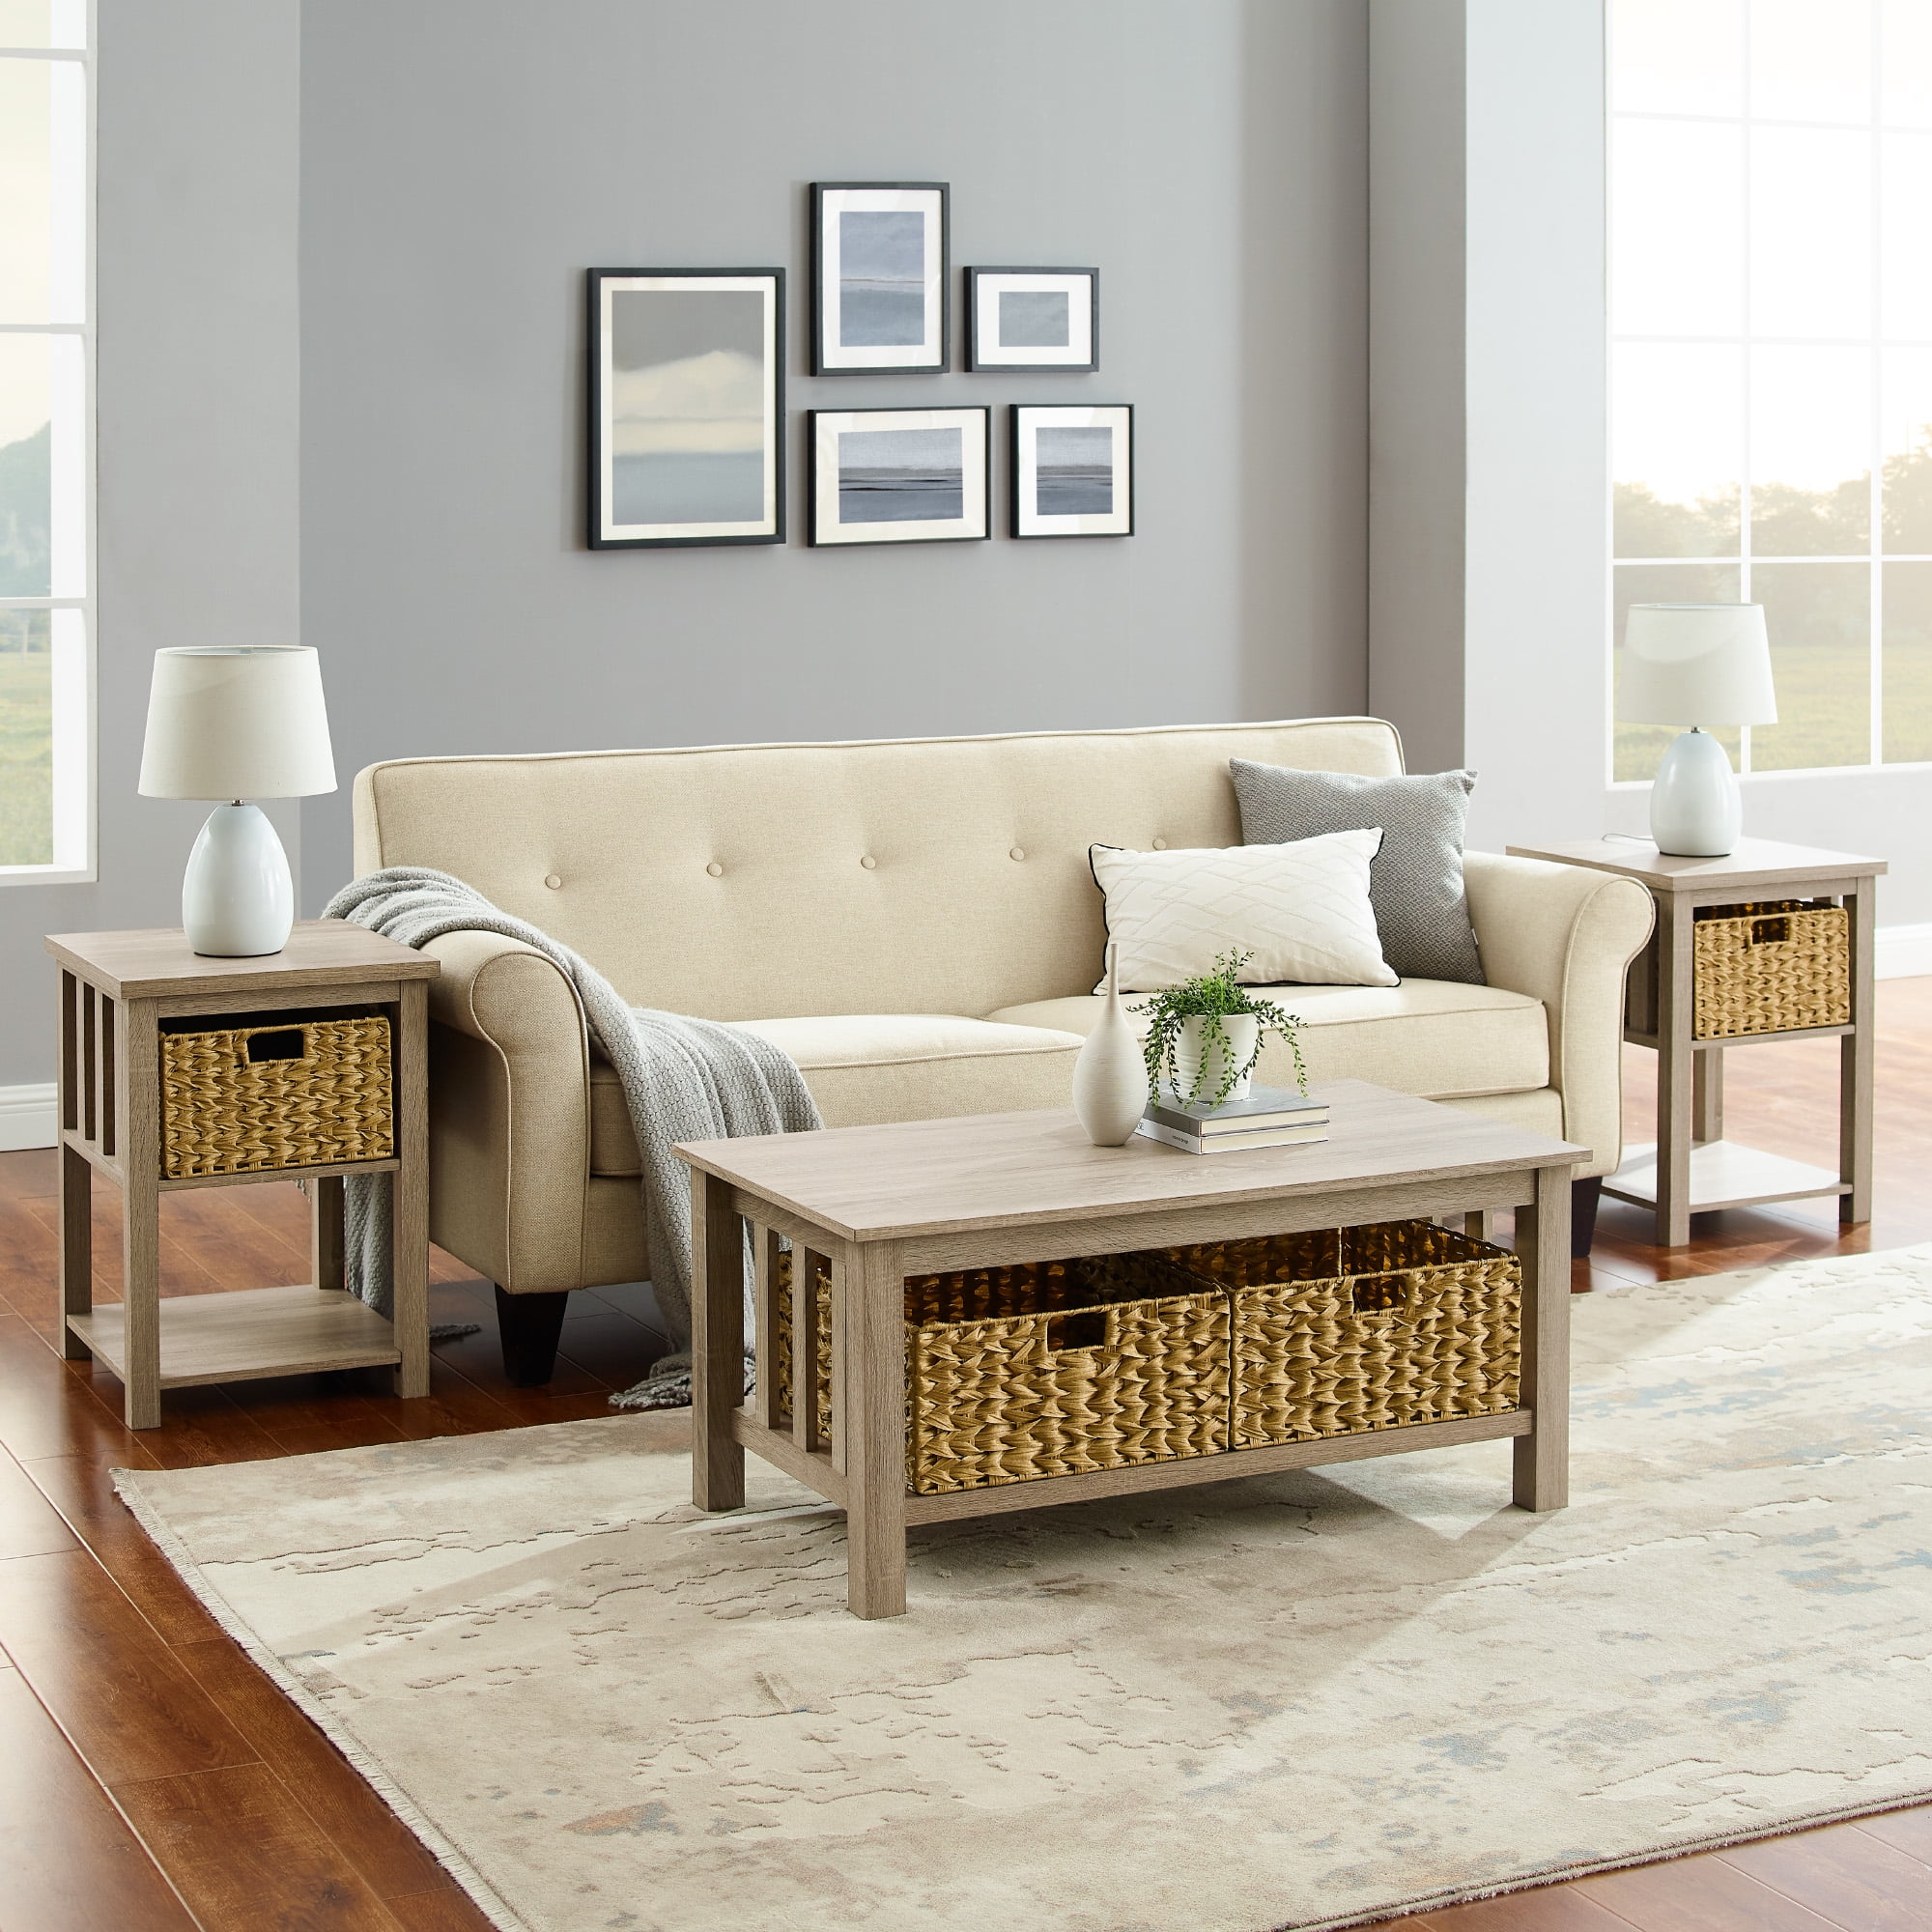 Details about   3-Piece Espresso Finish Coffee Table and End Table Set Living Room Furniture 